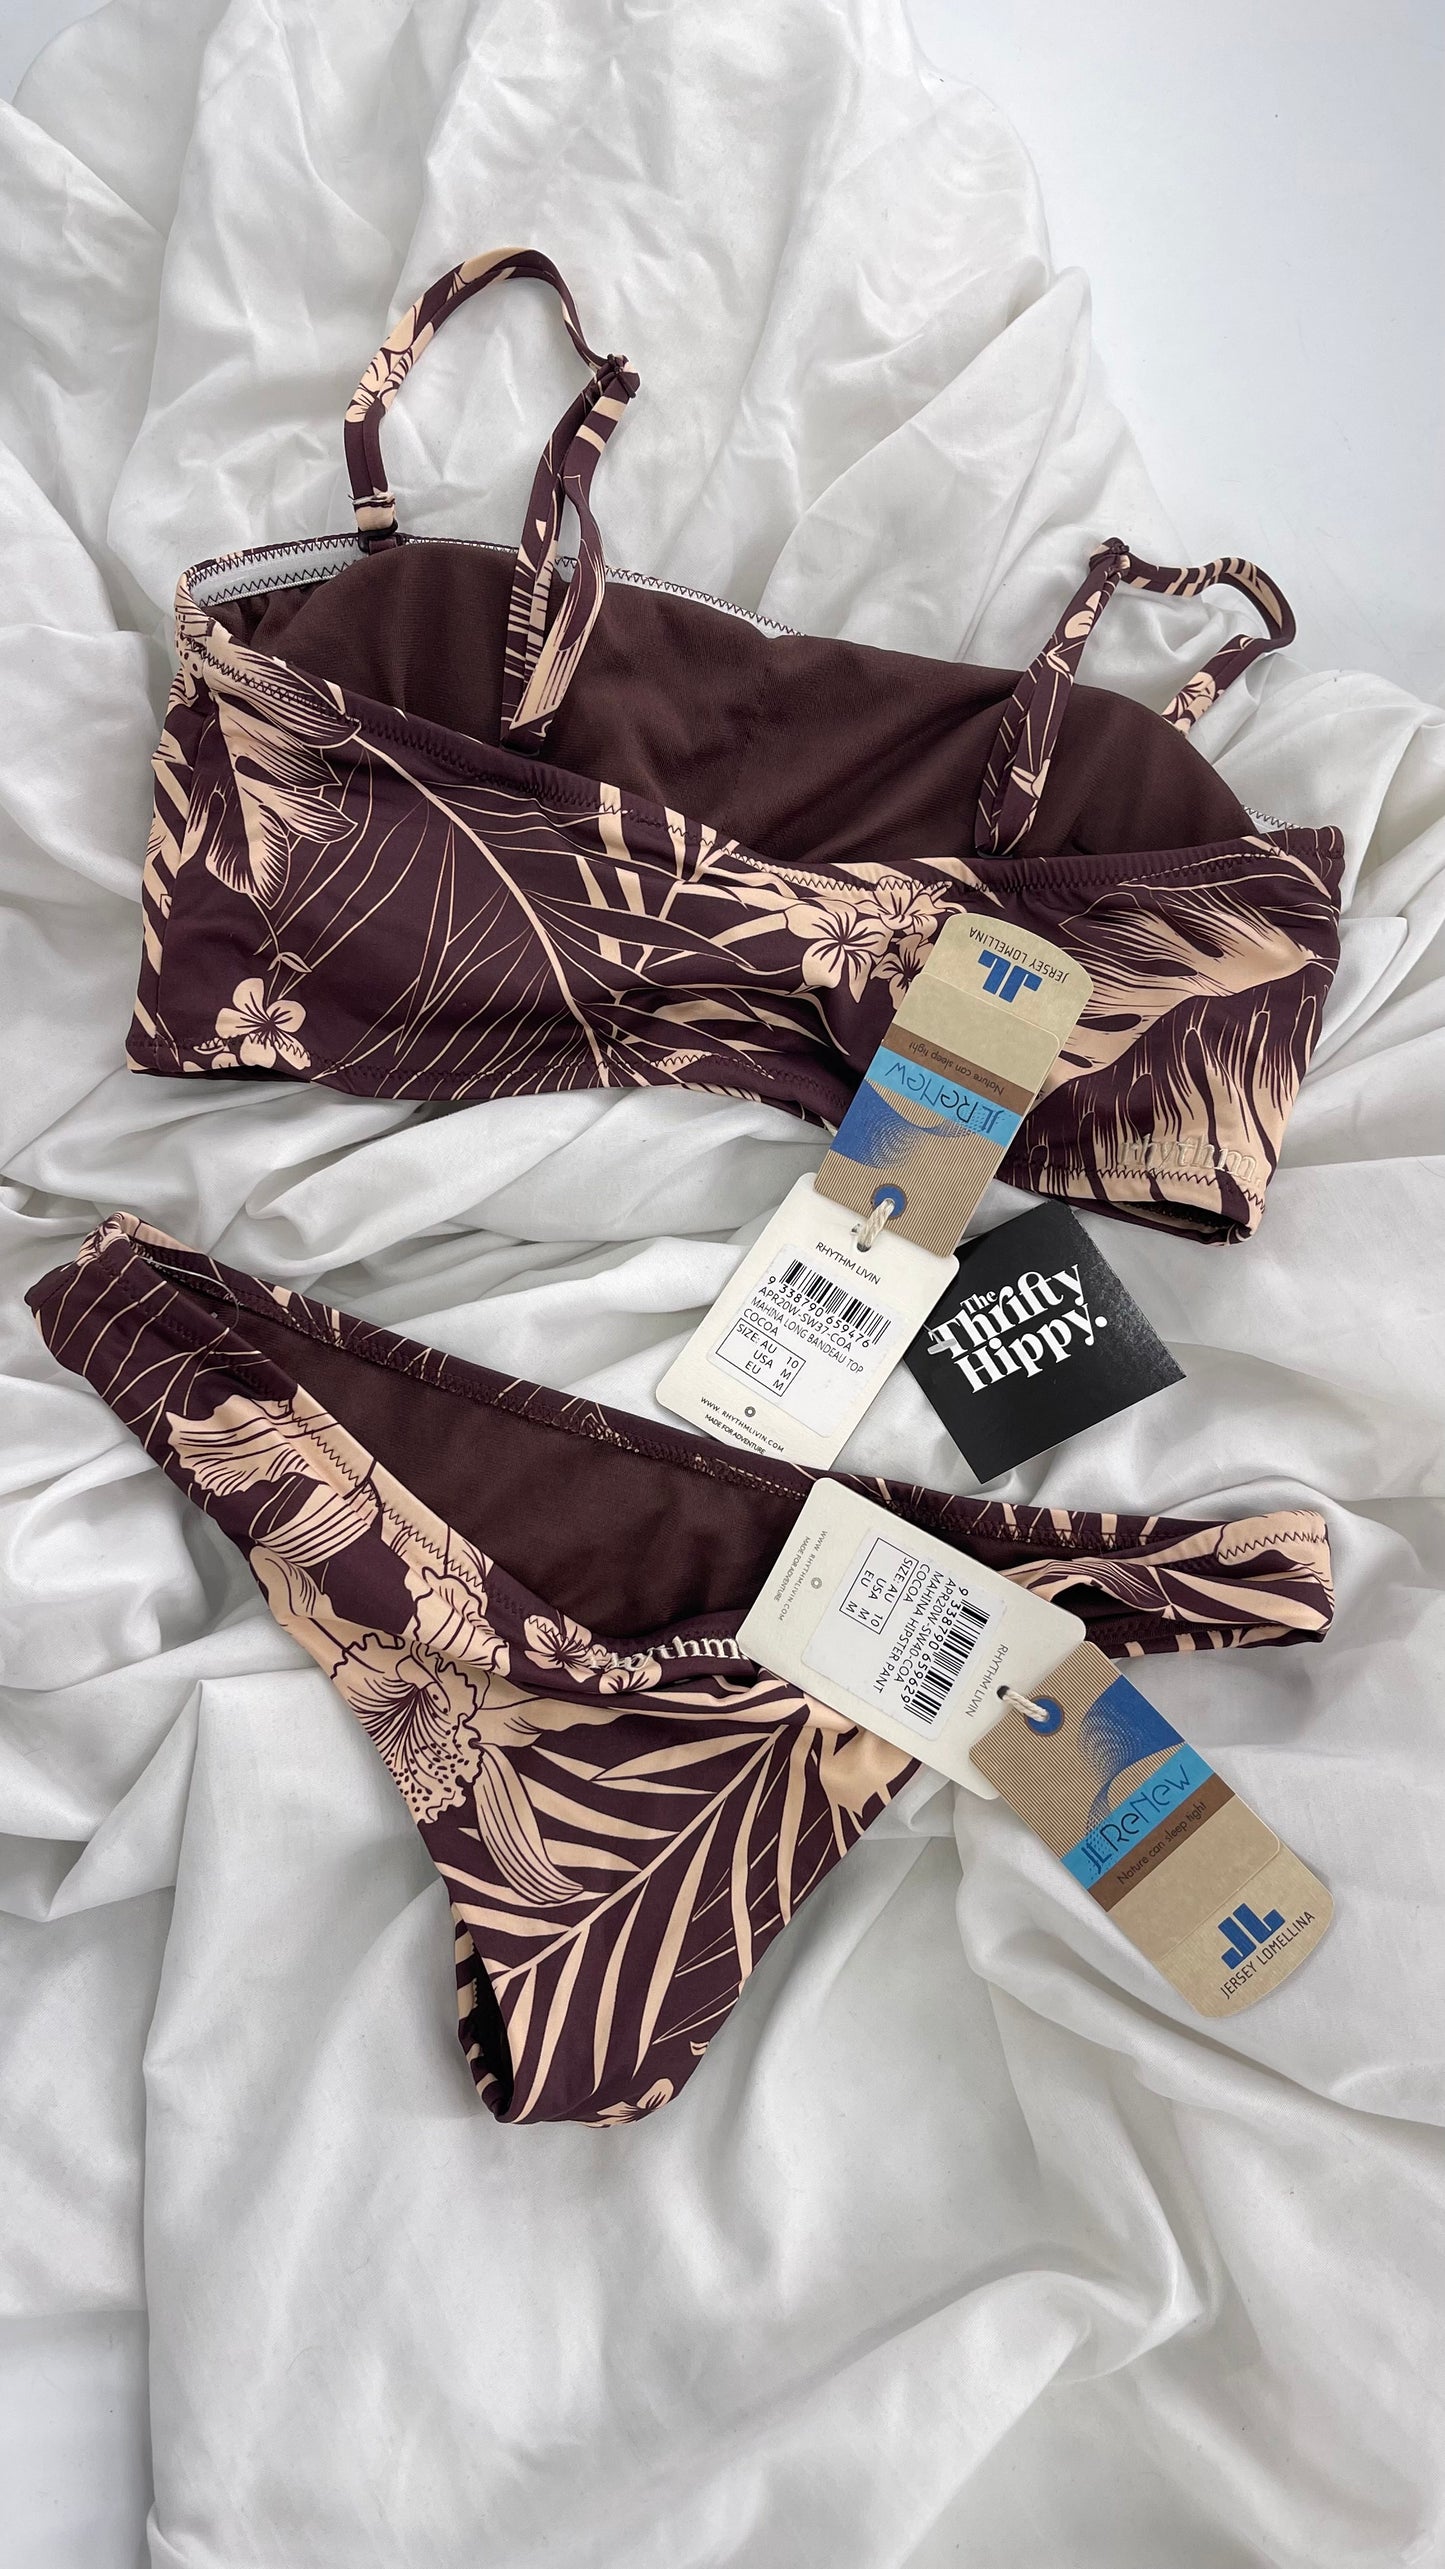 RHYTHM Brown and Beige Tropical Palm Patterned Swim Set with Tags Attached